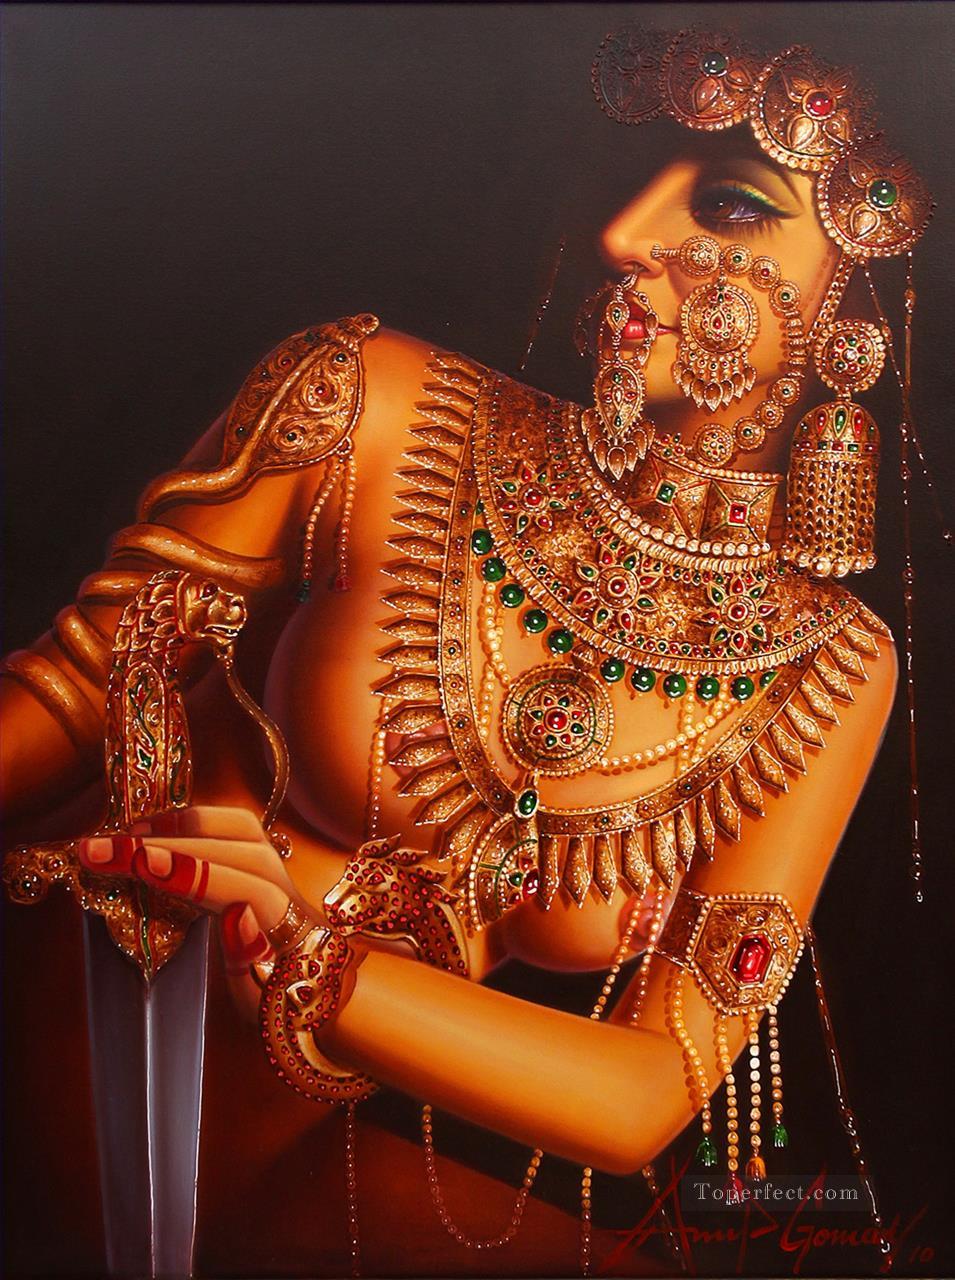 Deadly Beauty India Oil Paintings